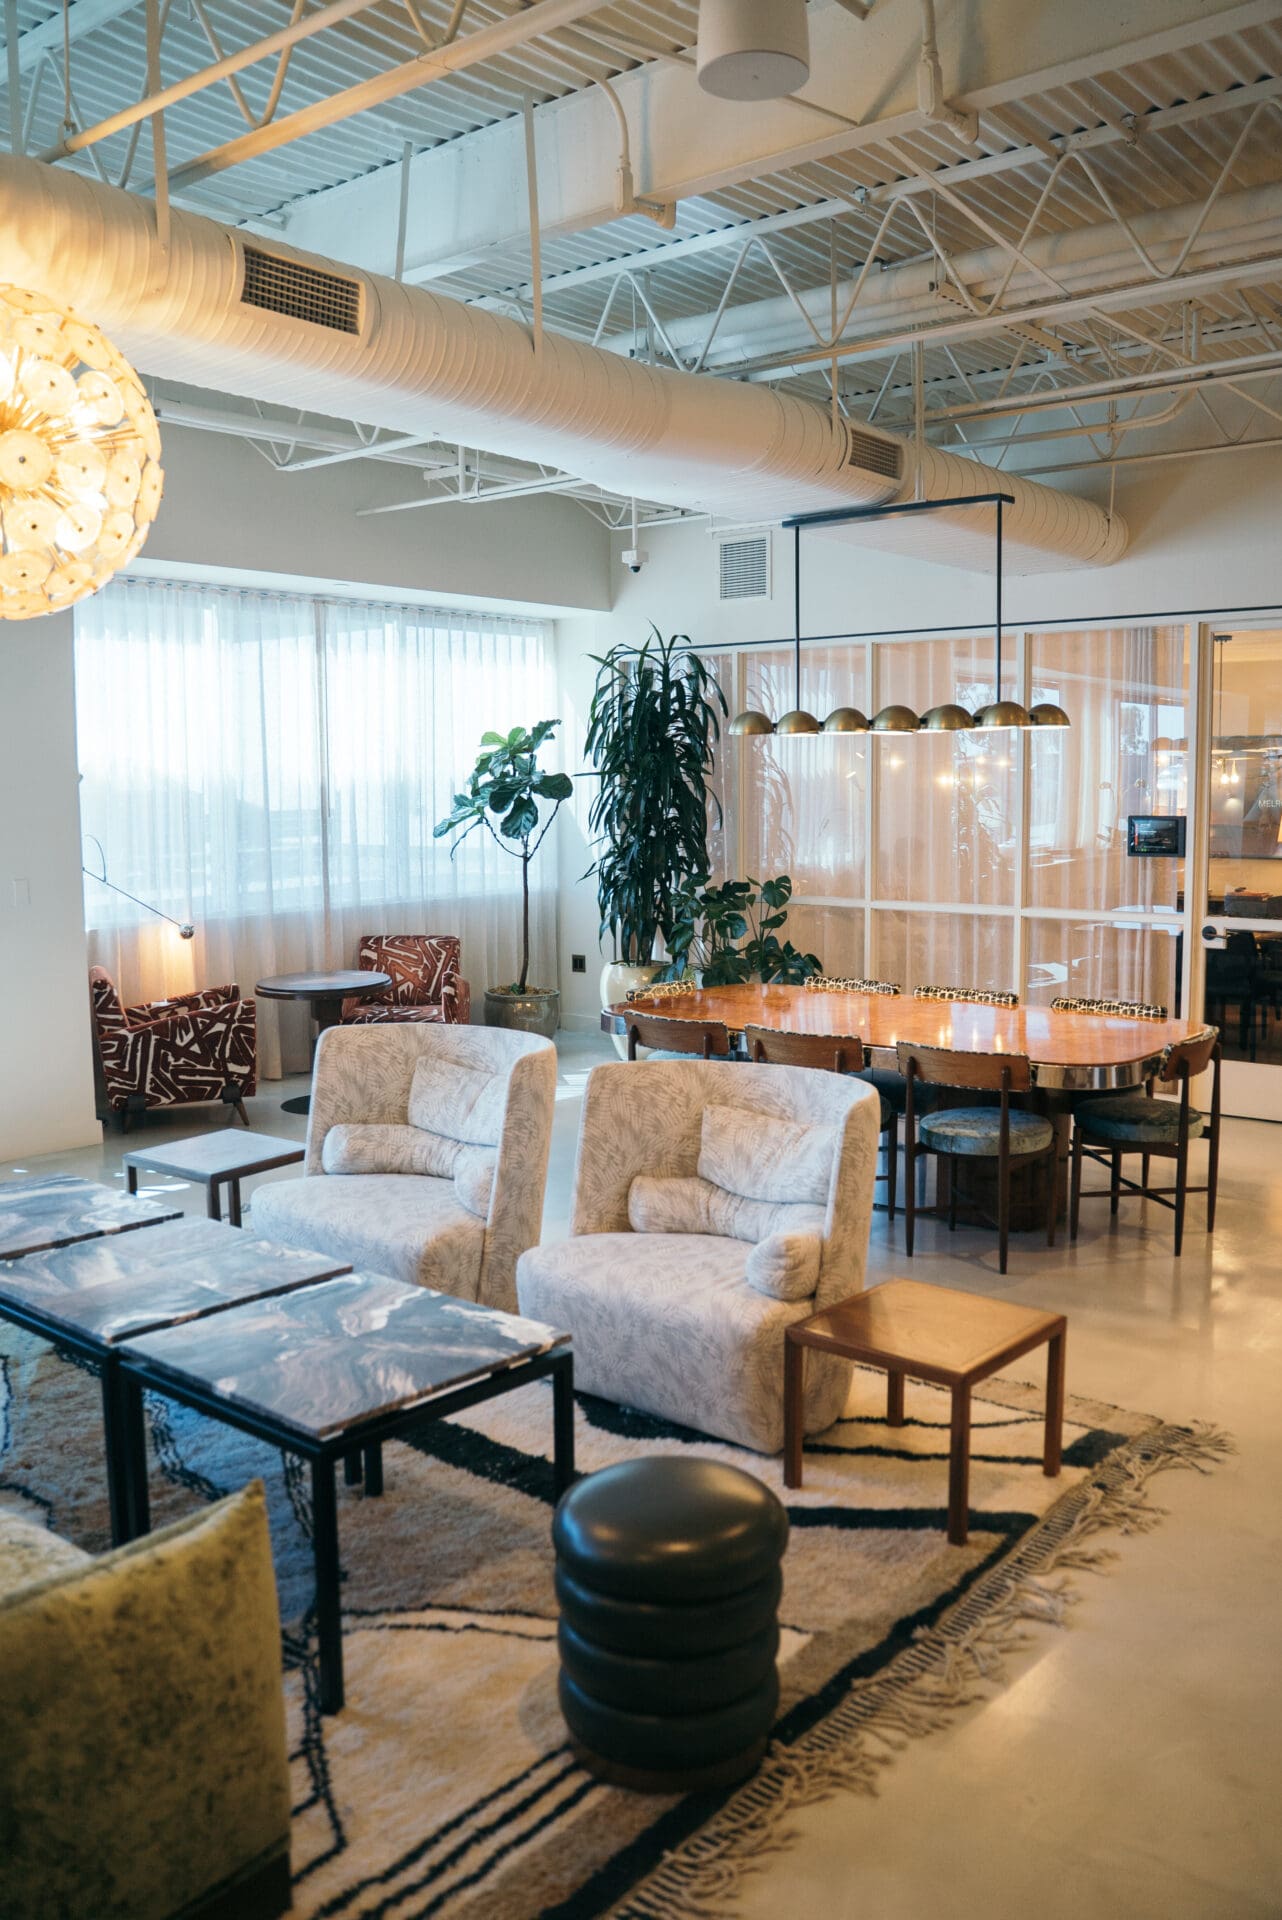 Best places to co-work in LA | An interior view of Soho Works, with arm chairs, tables and rugs